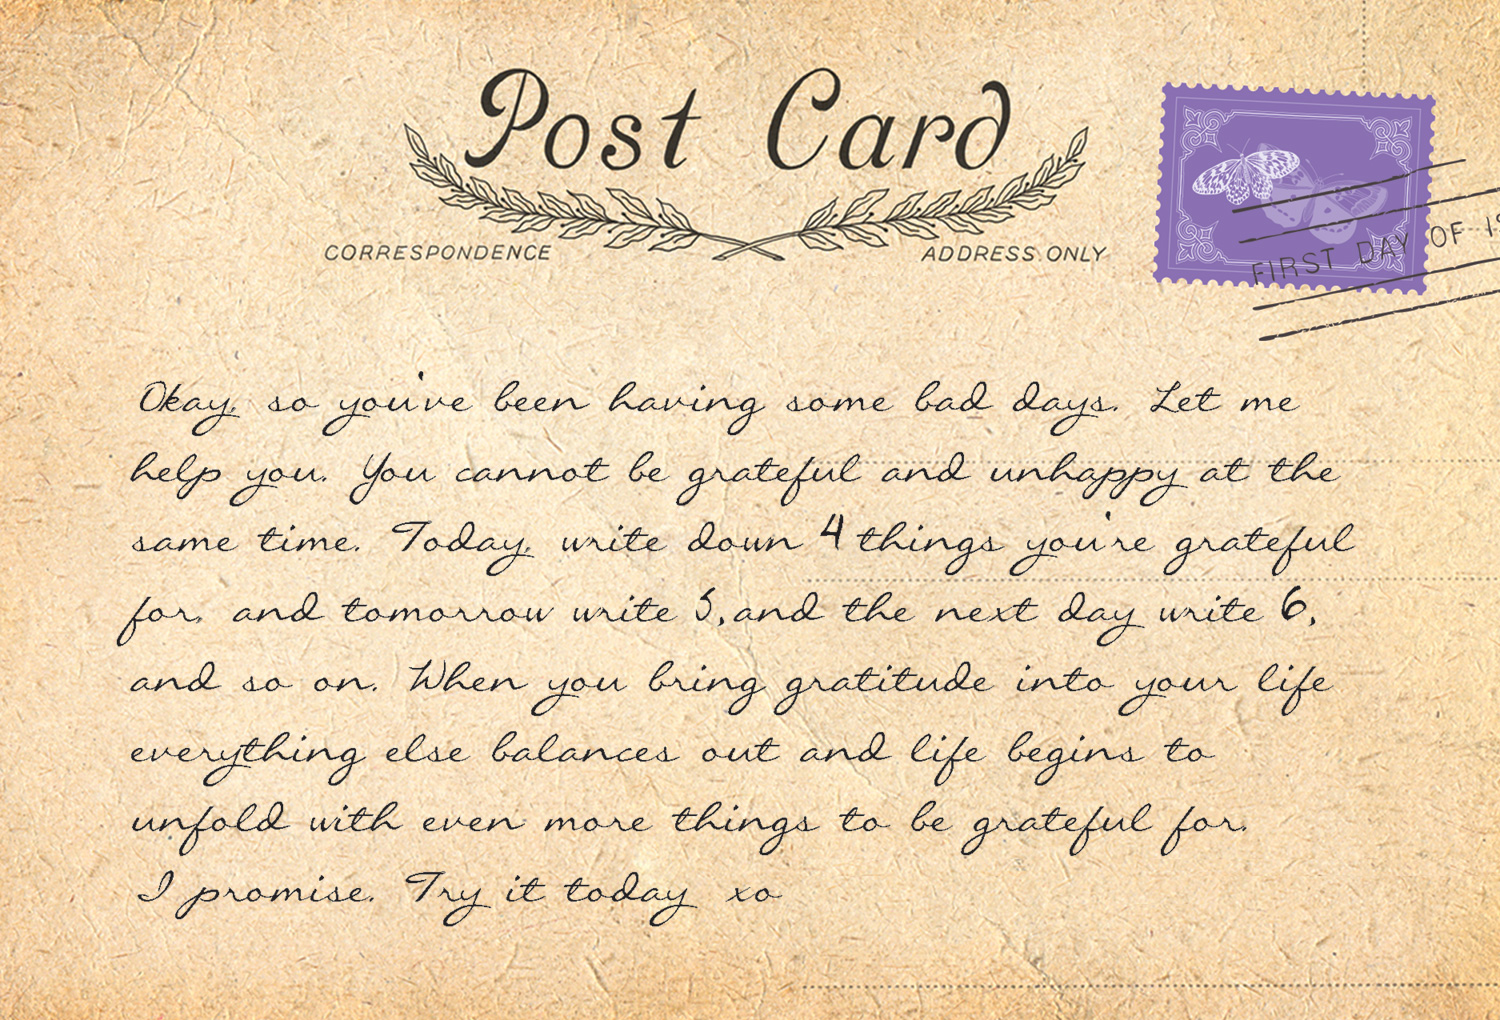 POSTCARDS FROM HEAVEN 2 - back 18